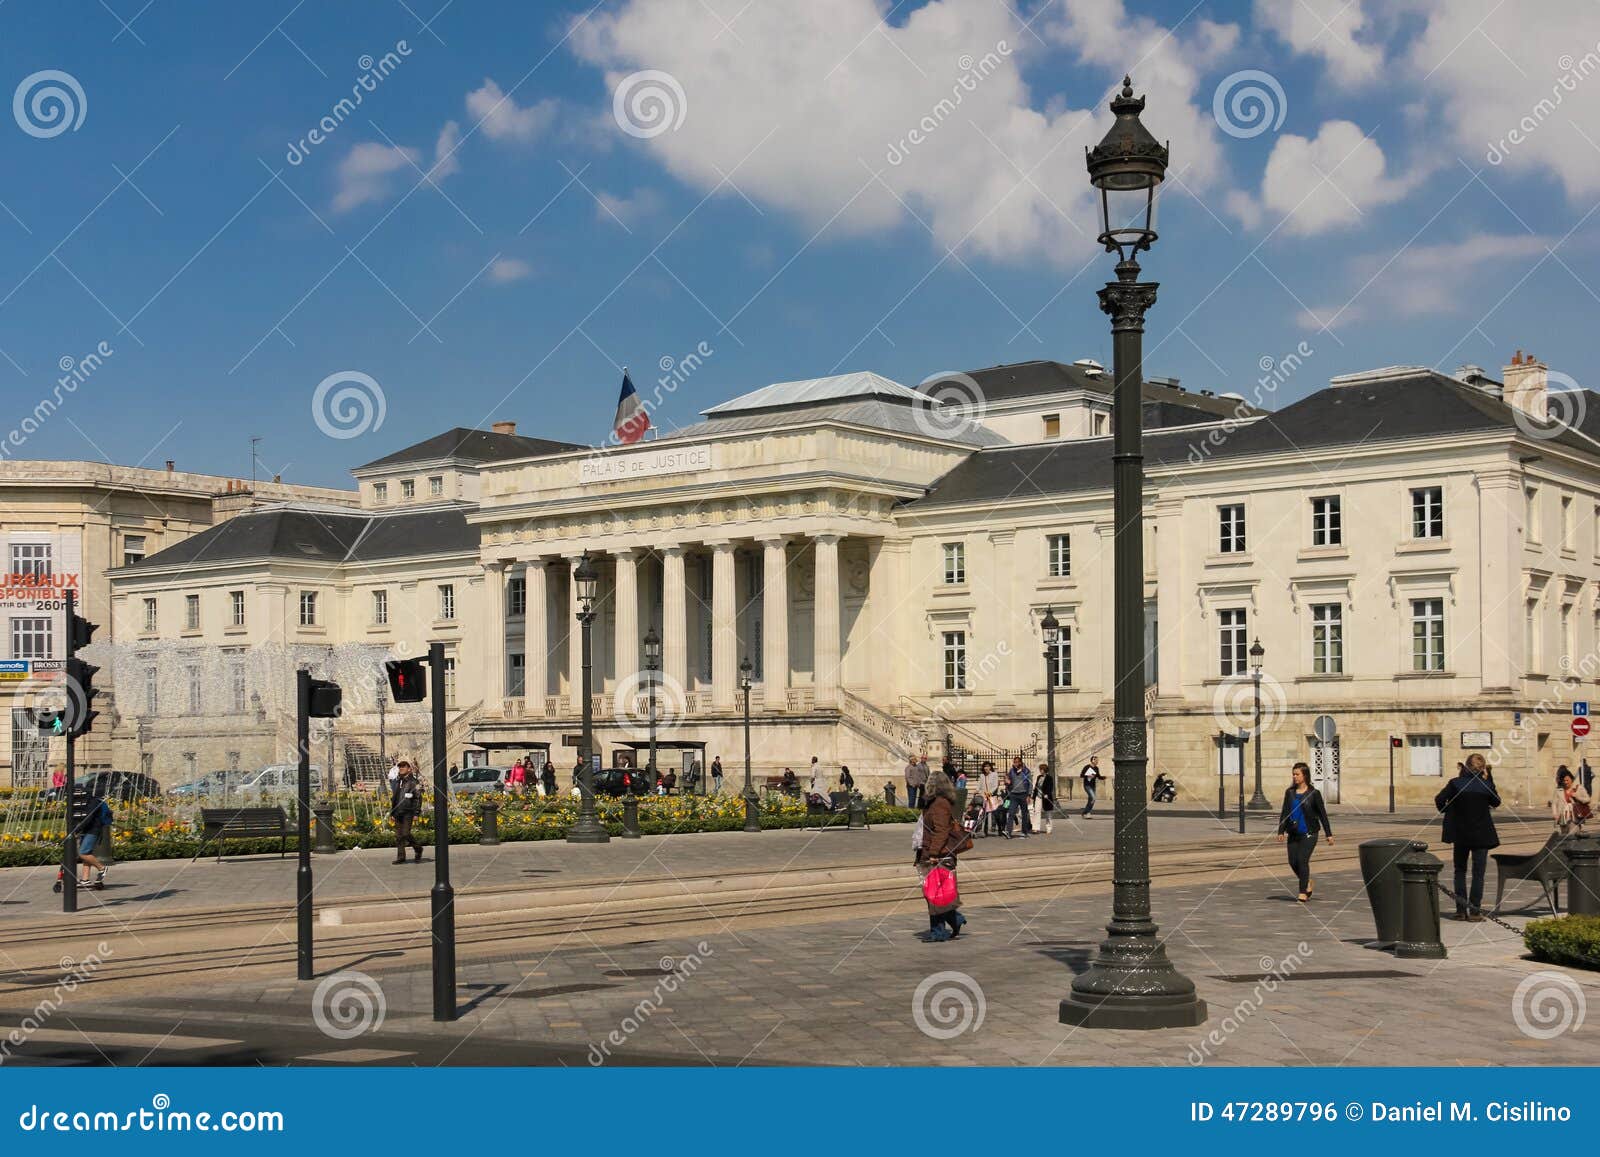 Palace of Justice. Tours. France Editorial Photo - Image of culture, city:  47289796